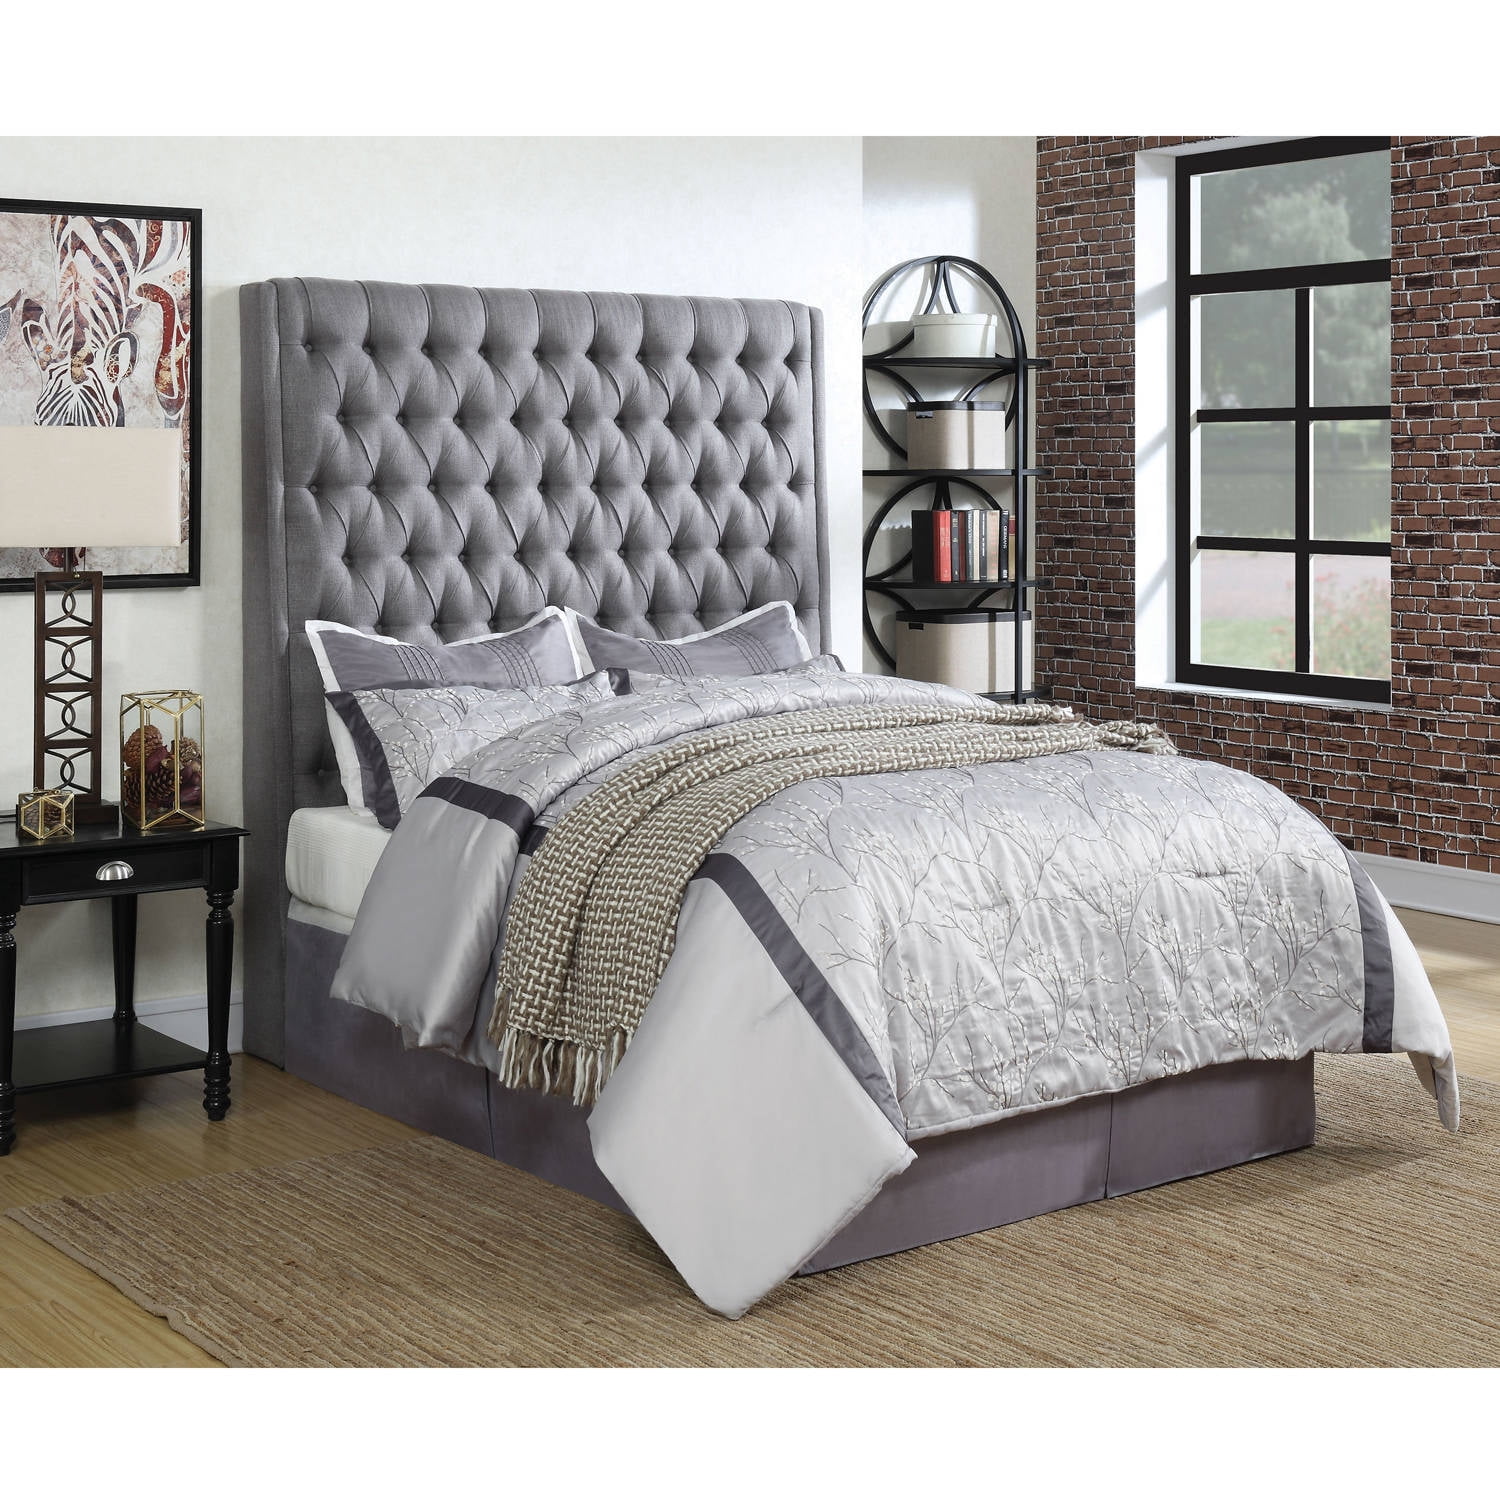 Coaster Company Camille Upholstered, Grey Tufted Headboard King Size Bed